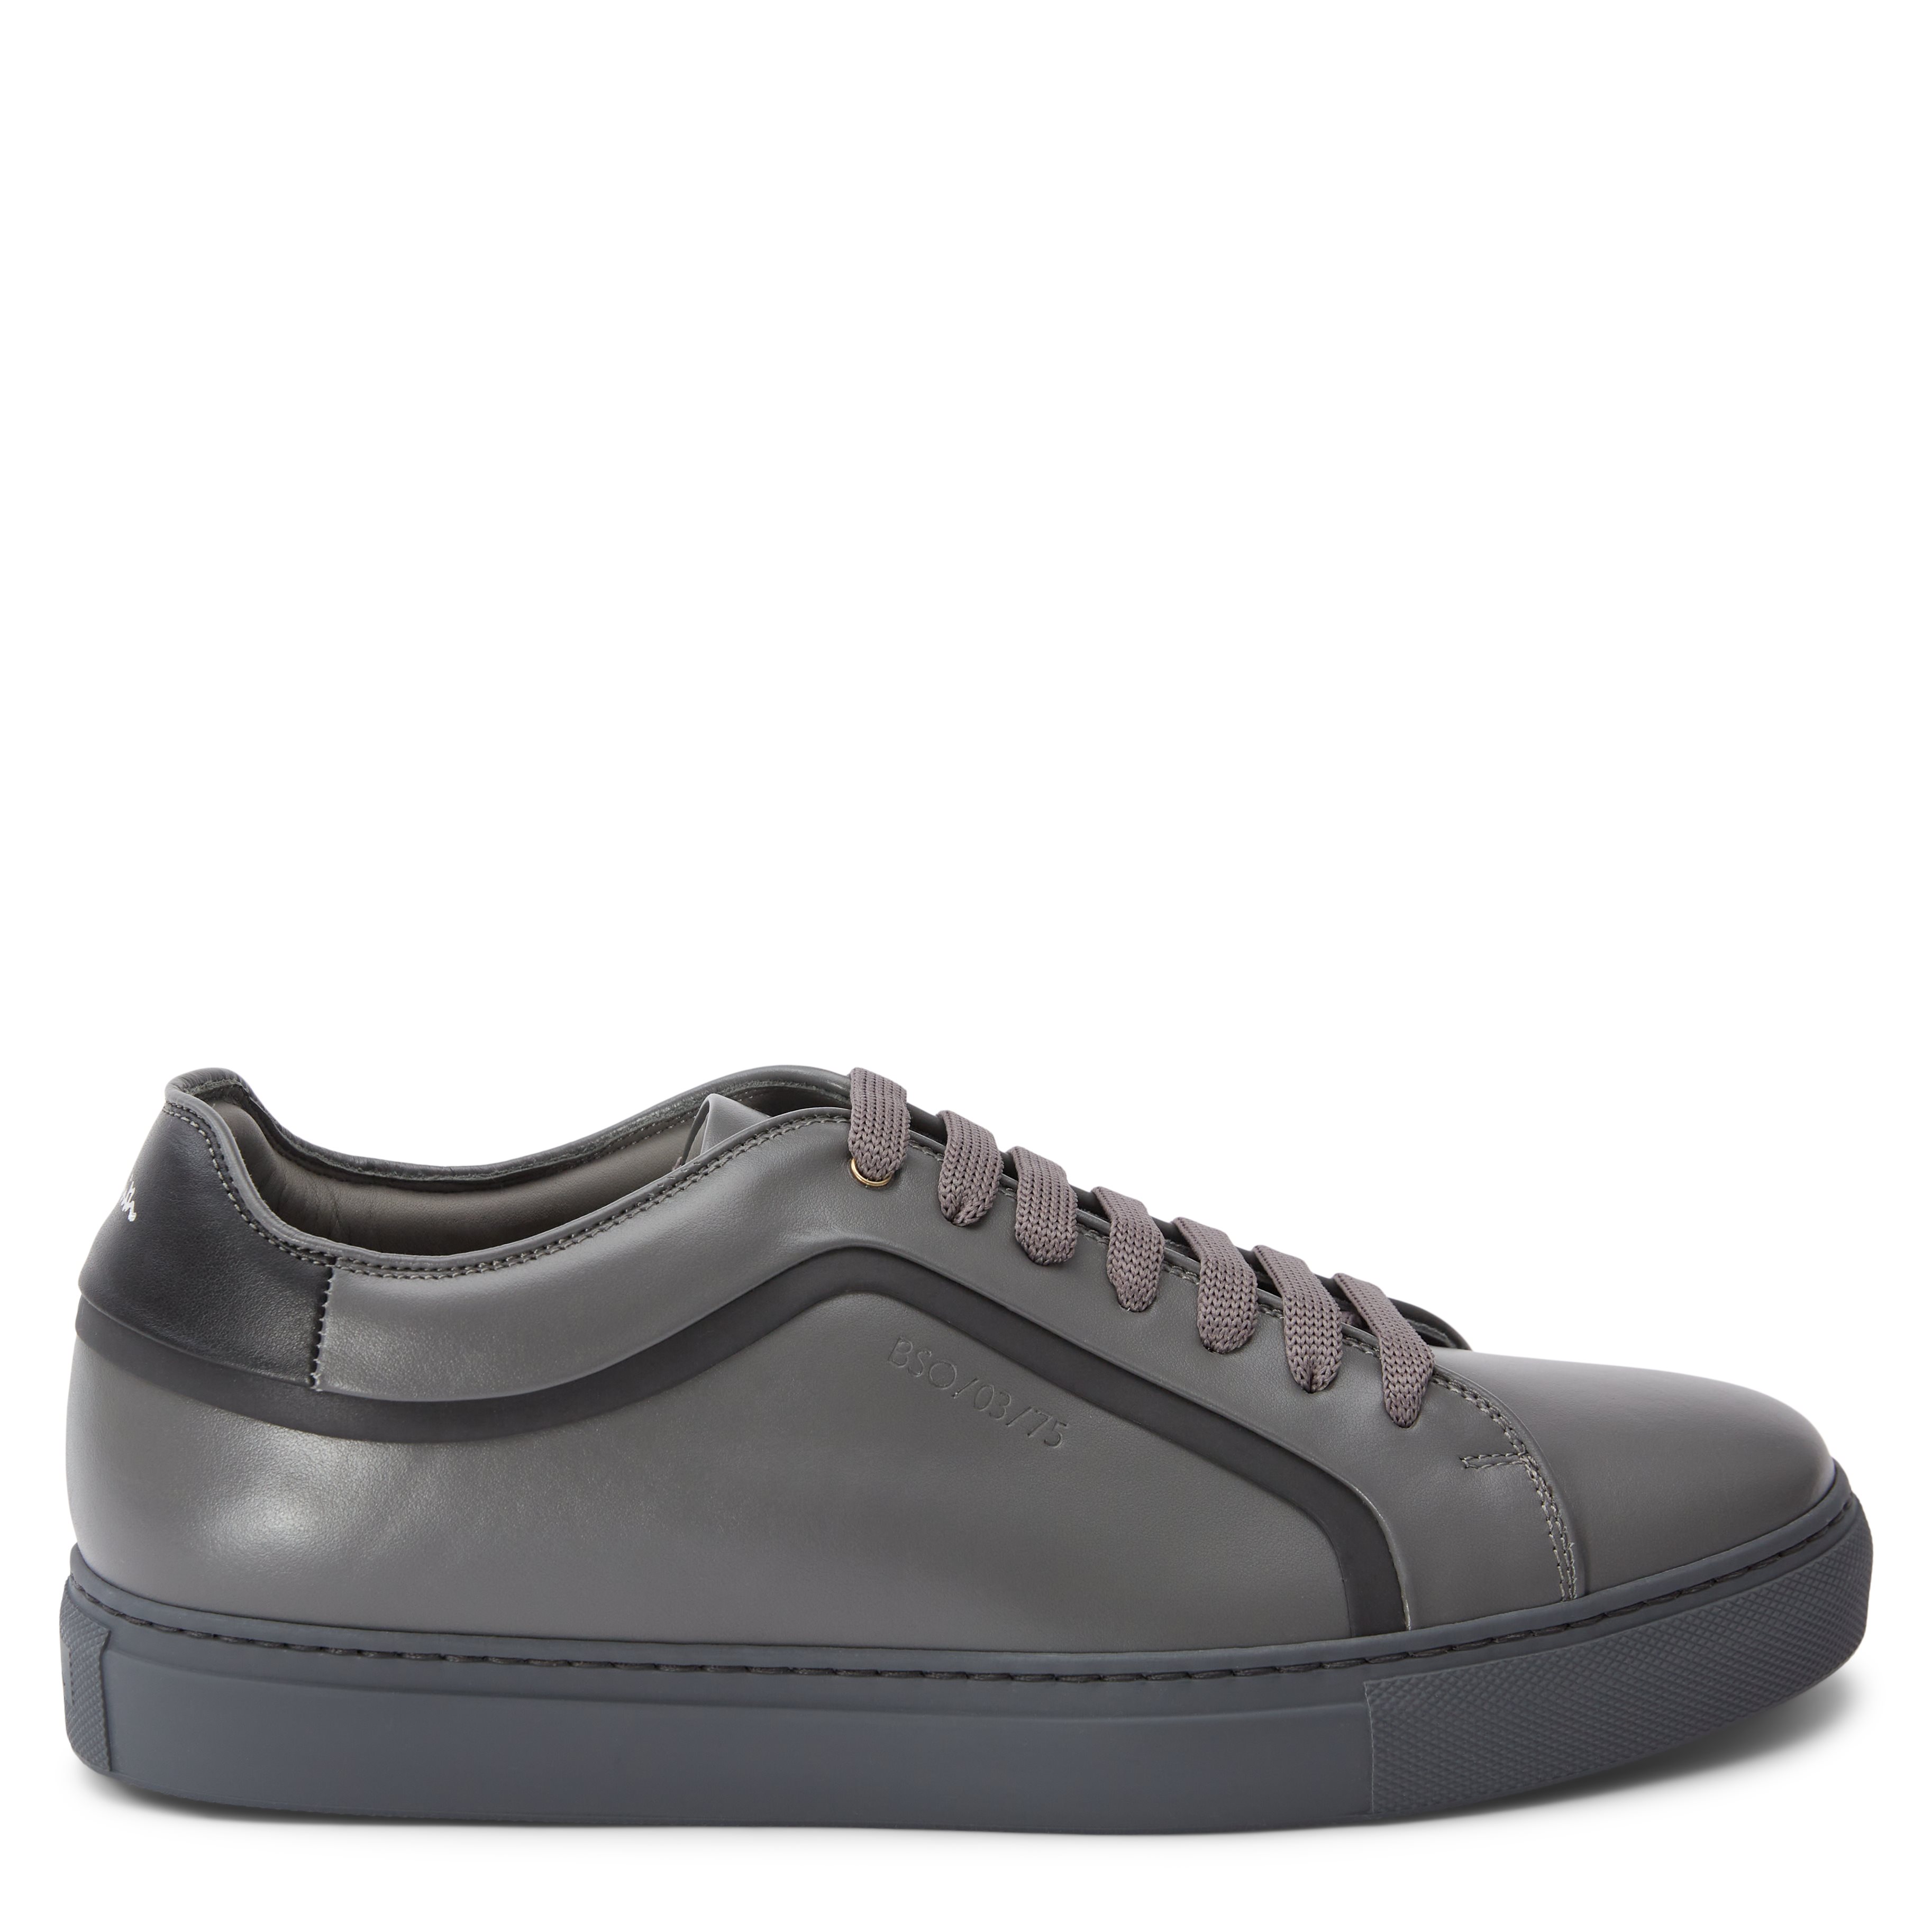 Basso Sneakers - Shoes - Grey